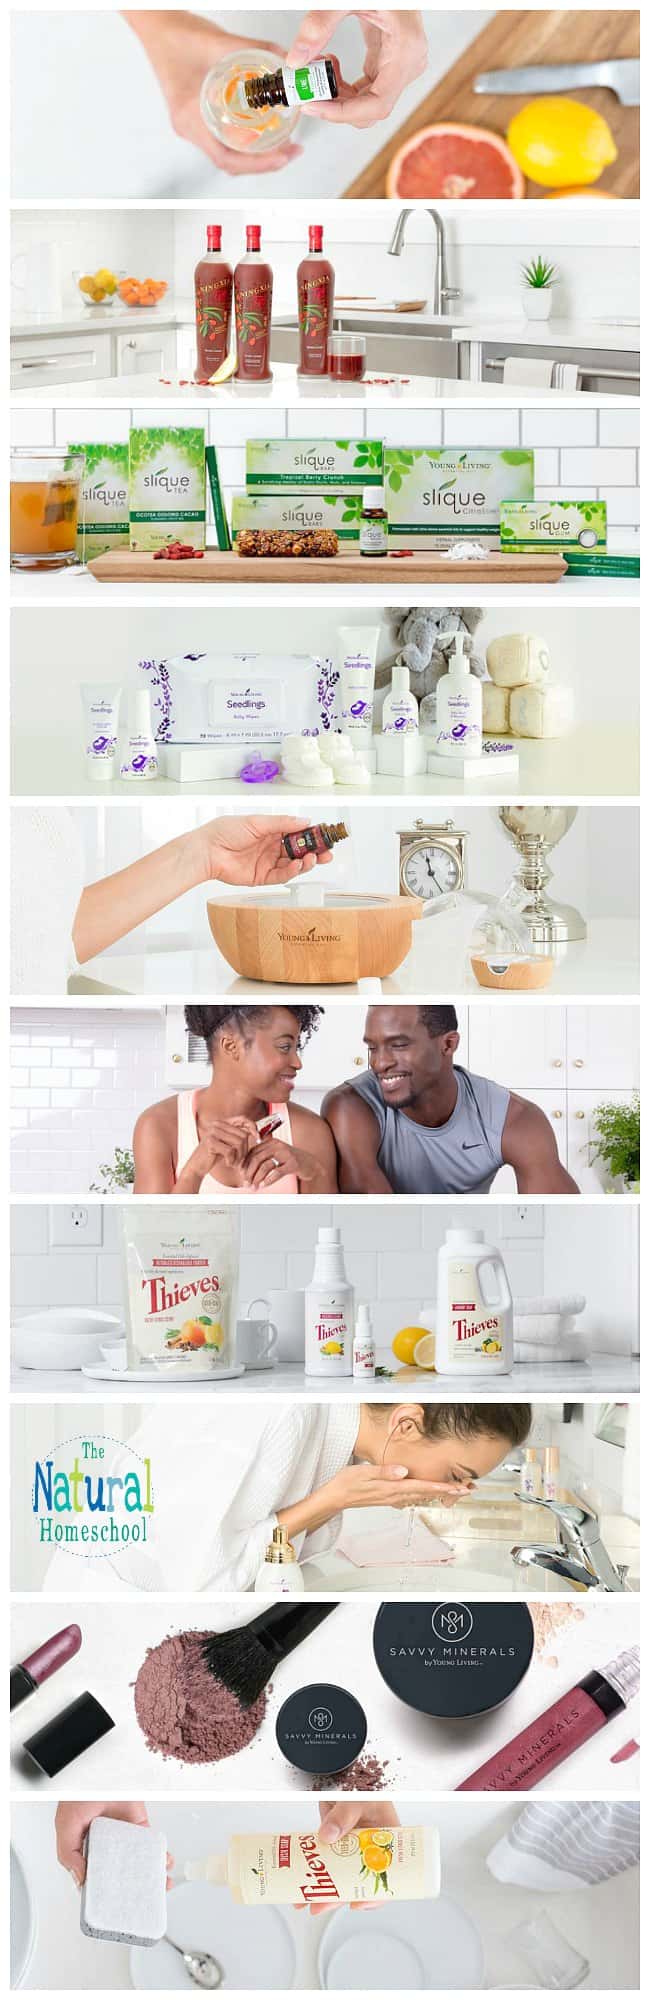 So... why Young Living essential oils and not other companies' products? Well, let's discuss it in depth in this blog post!